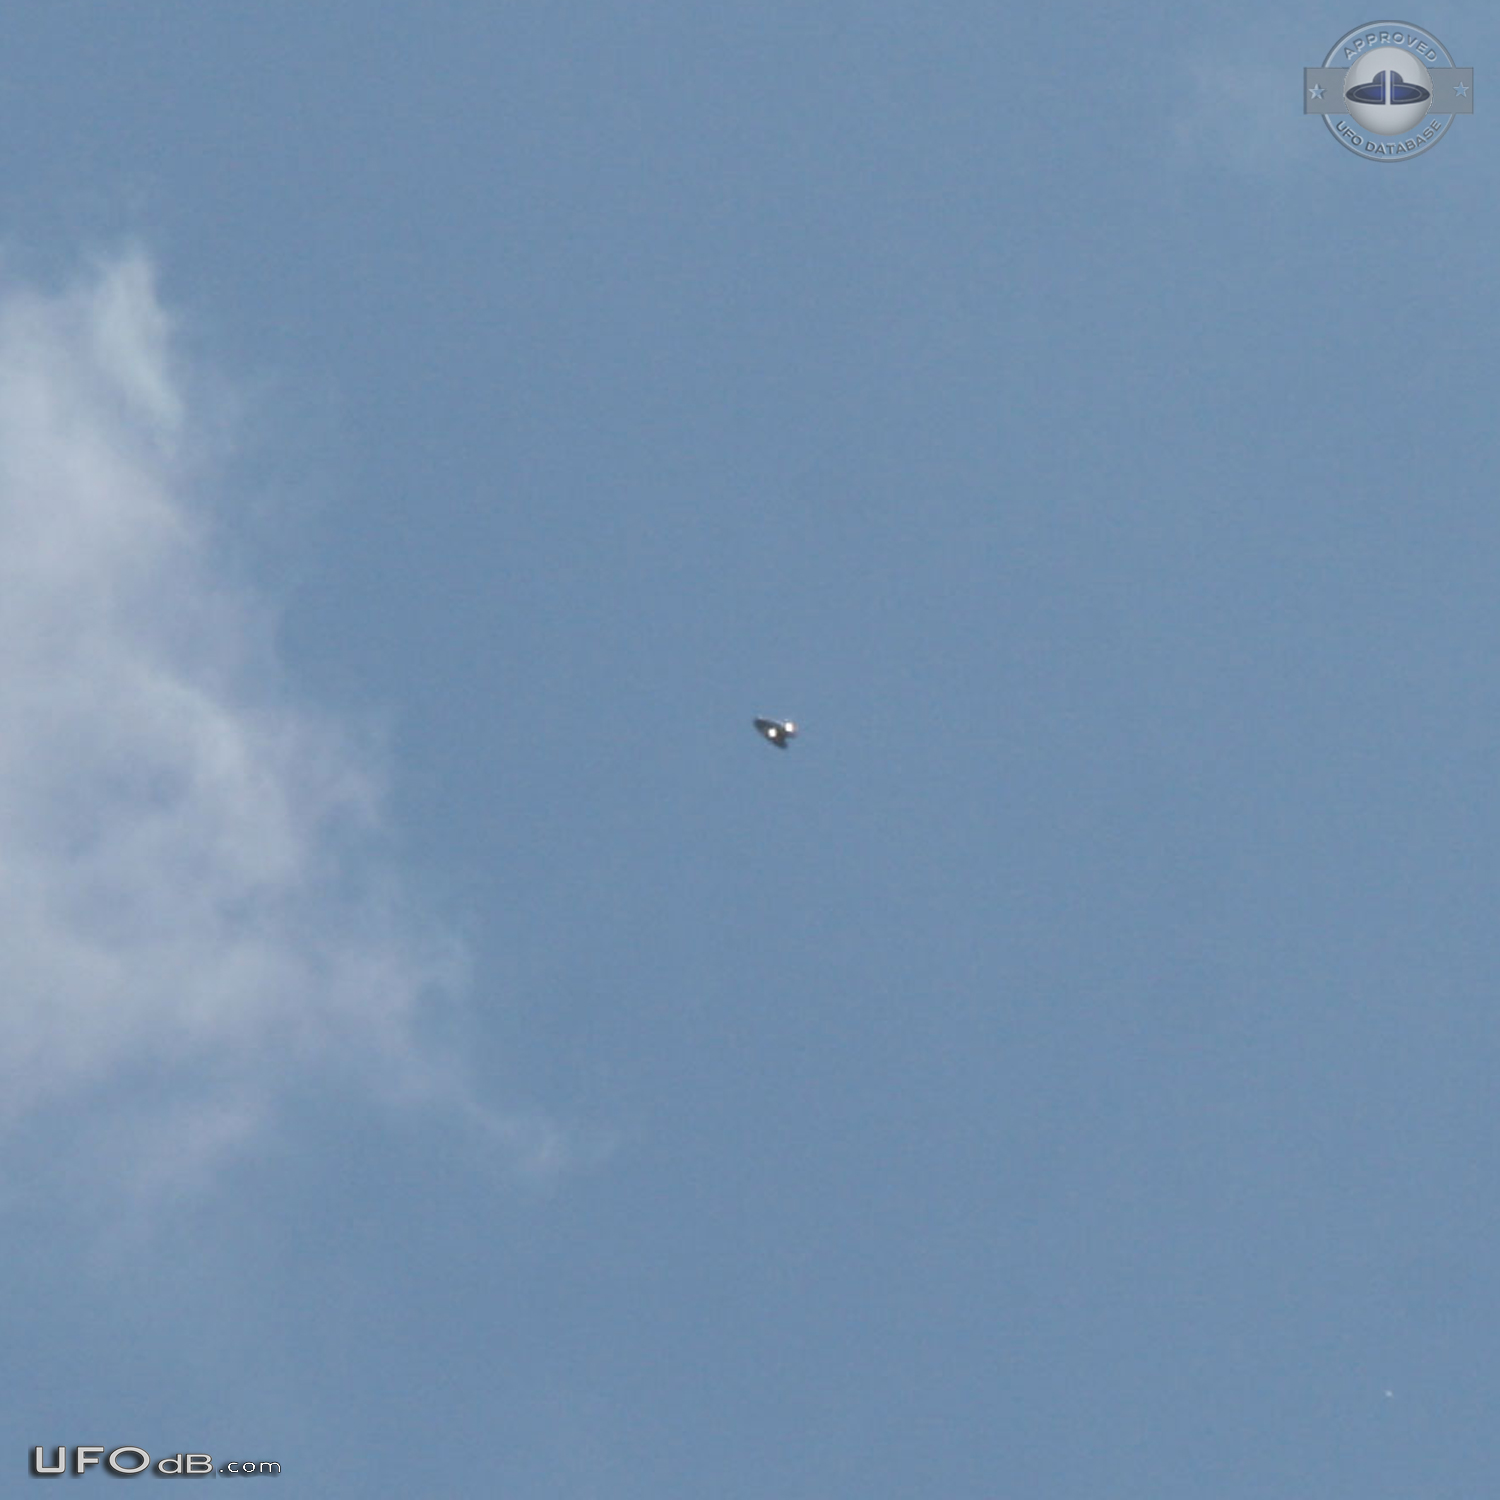 Watched UFO first in the west move quickly through to north east - Gle UFO Picture #740-1